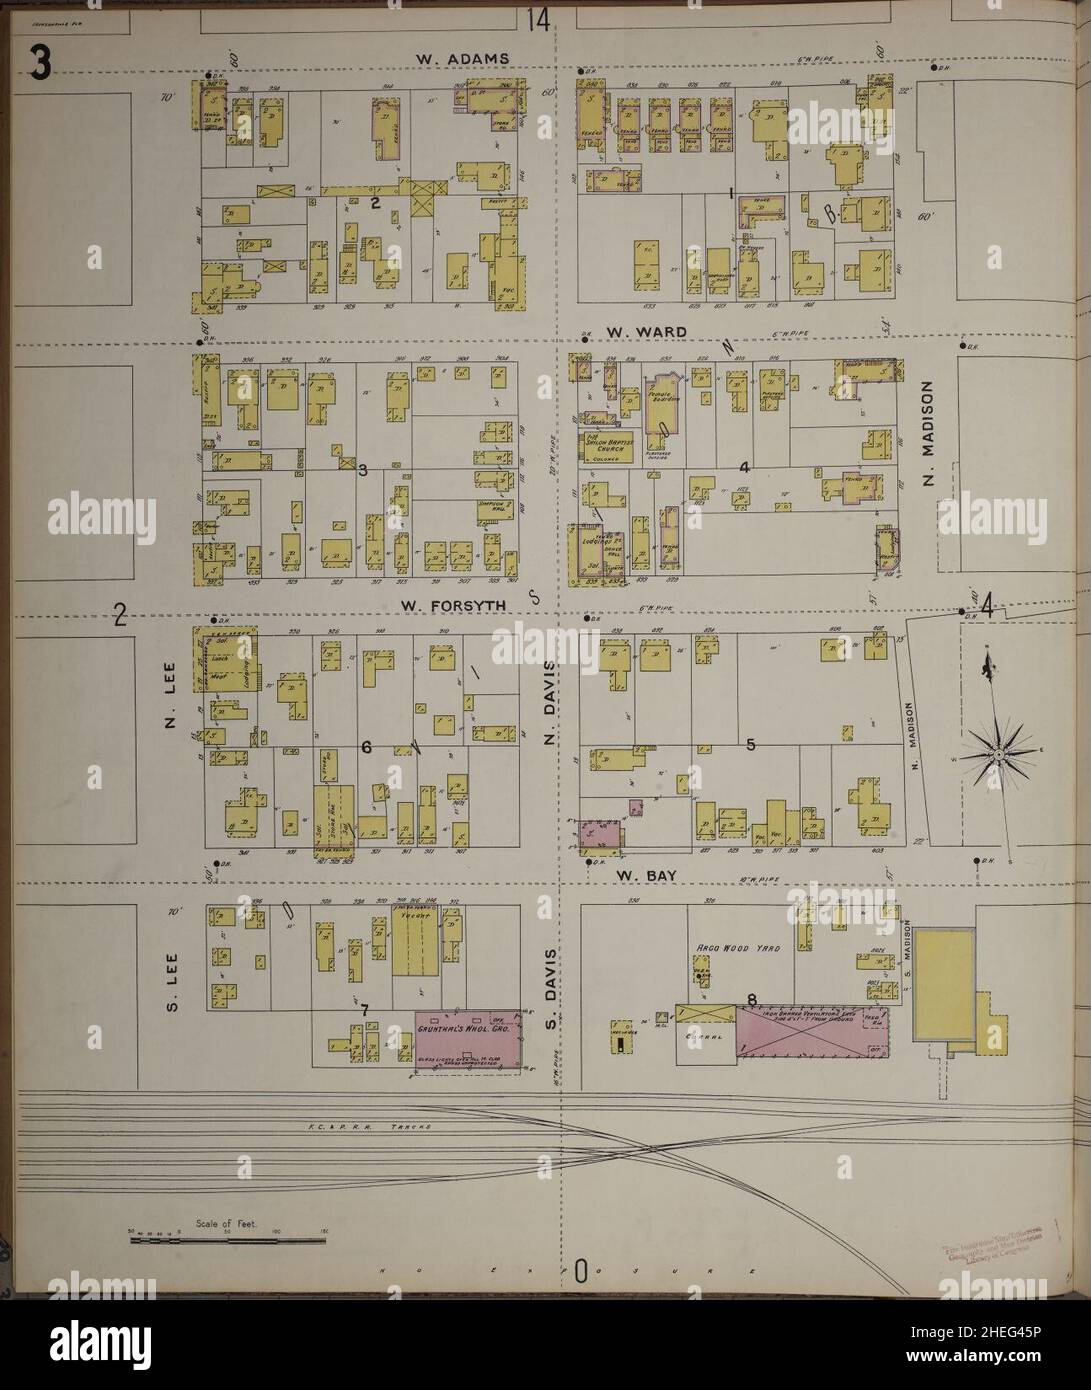 Sanborn Fire Insurance Map from Jacksonville, Duval County, Florida. Stock Photo